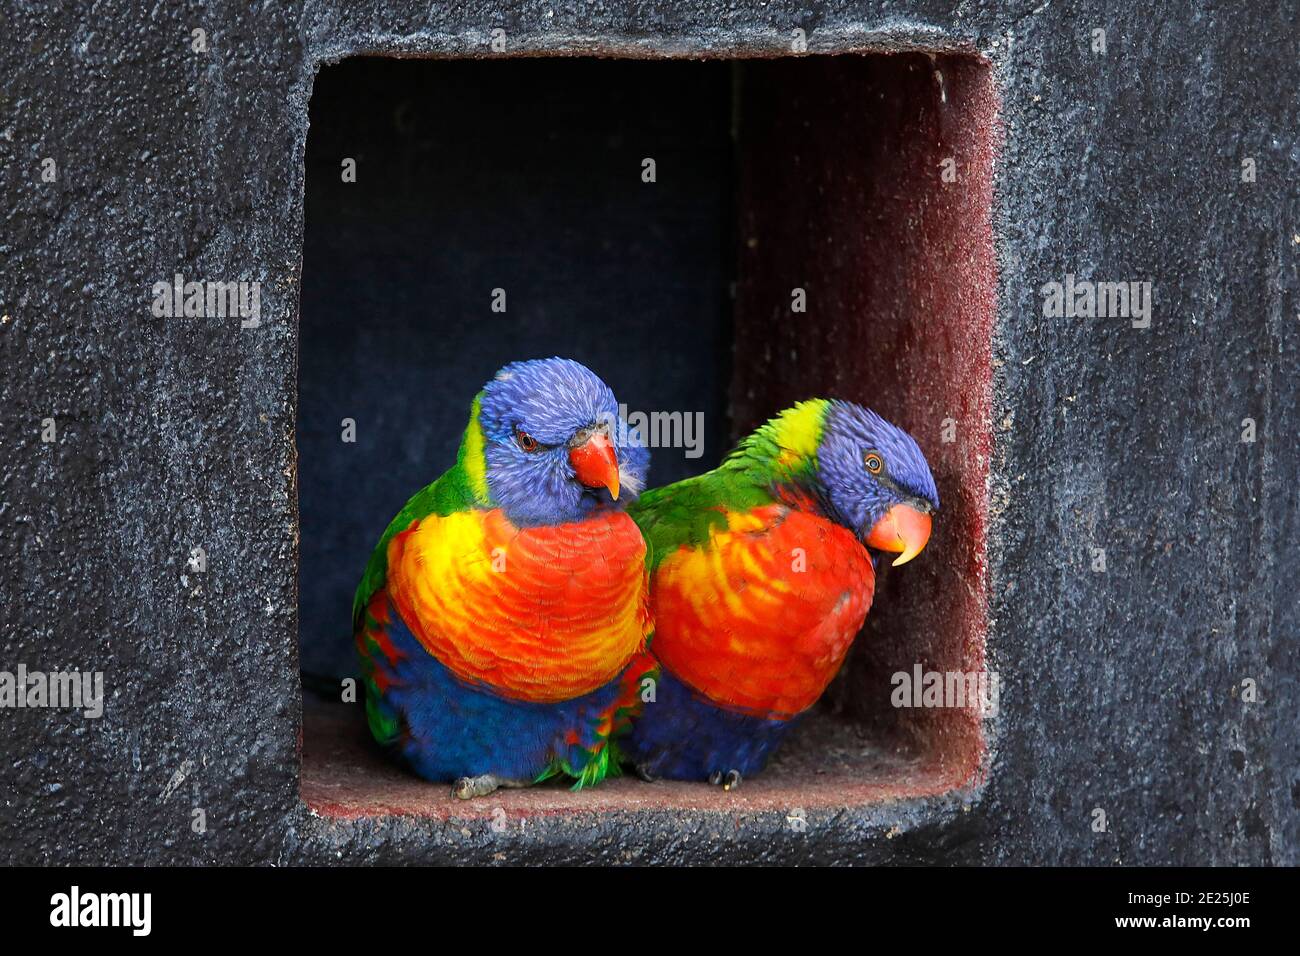 Eclectus parrot in Thoiry zoo park, France Stock Photo